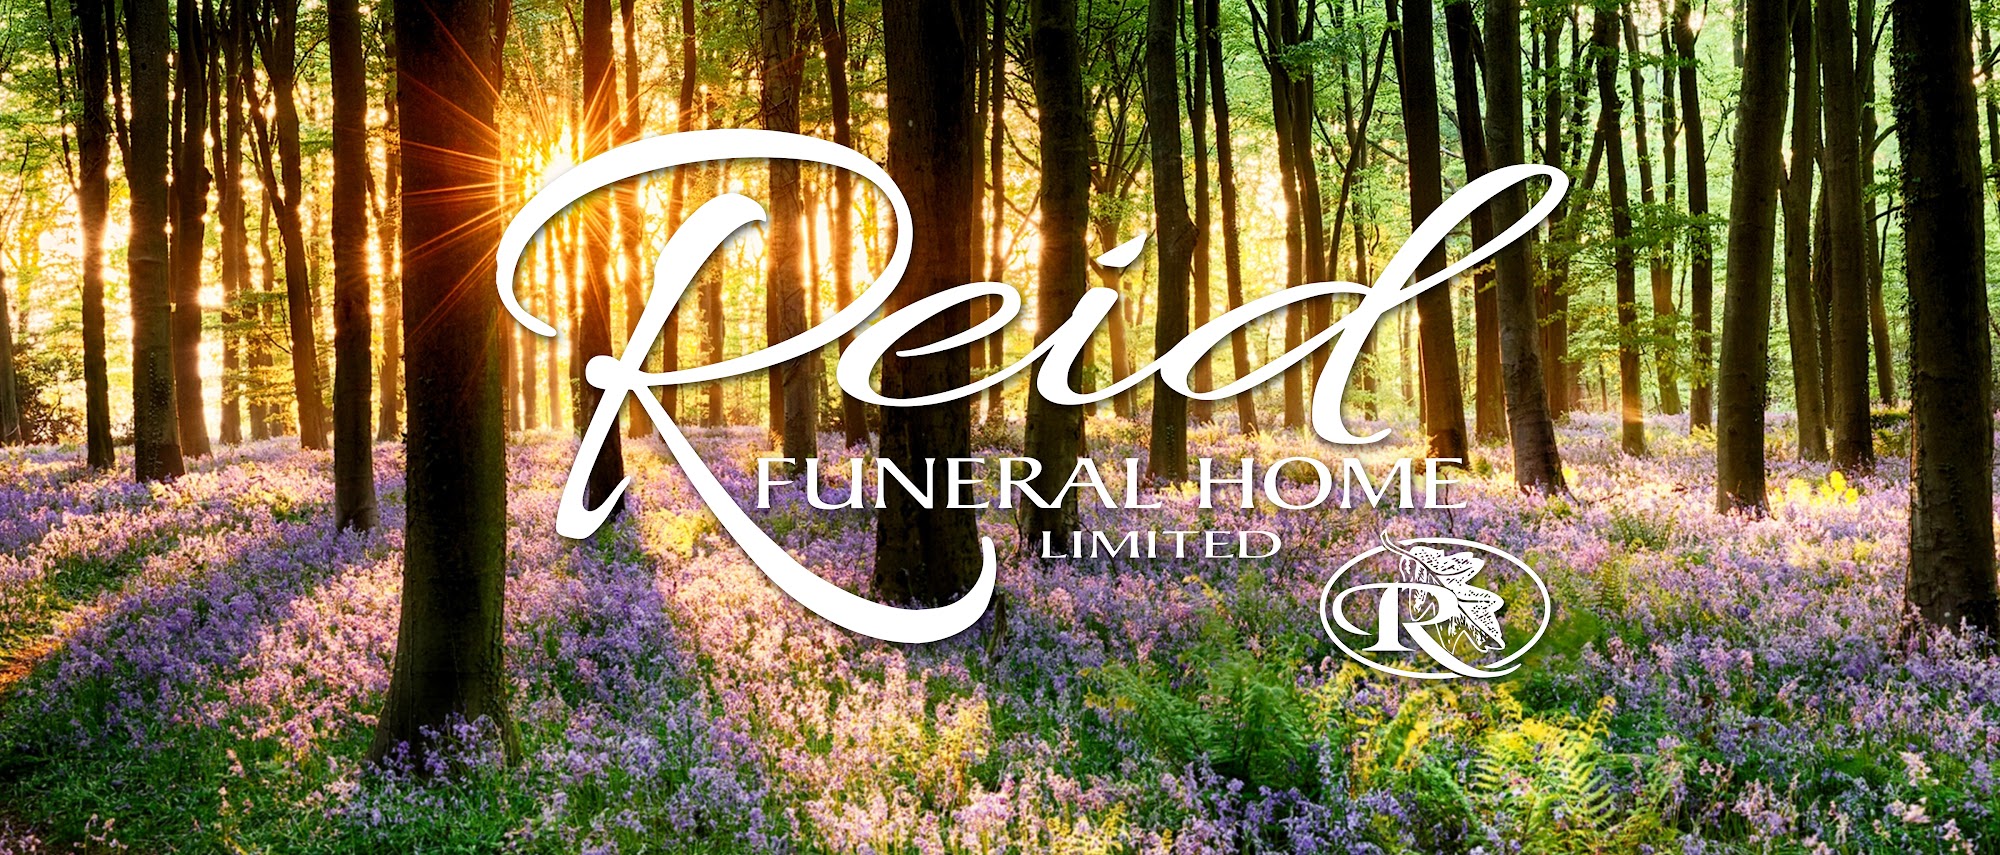 Reid Funeral Home Limited